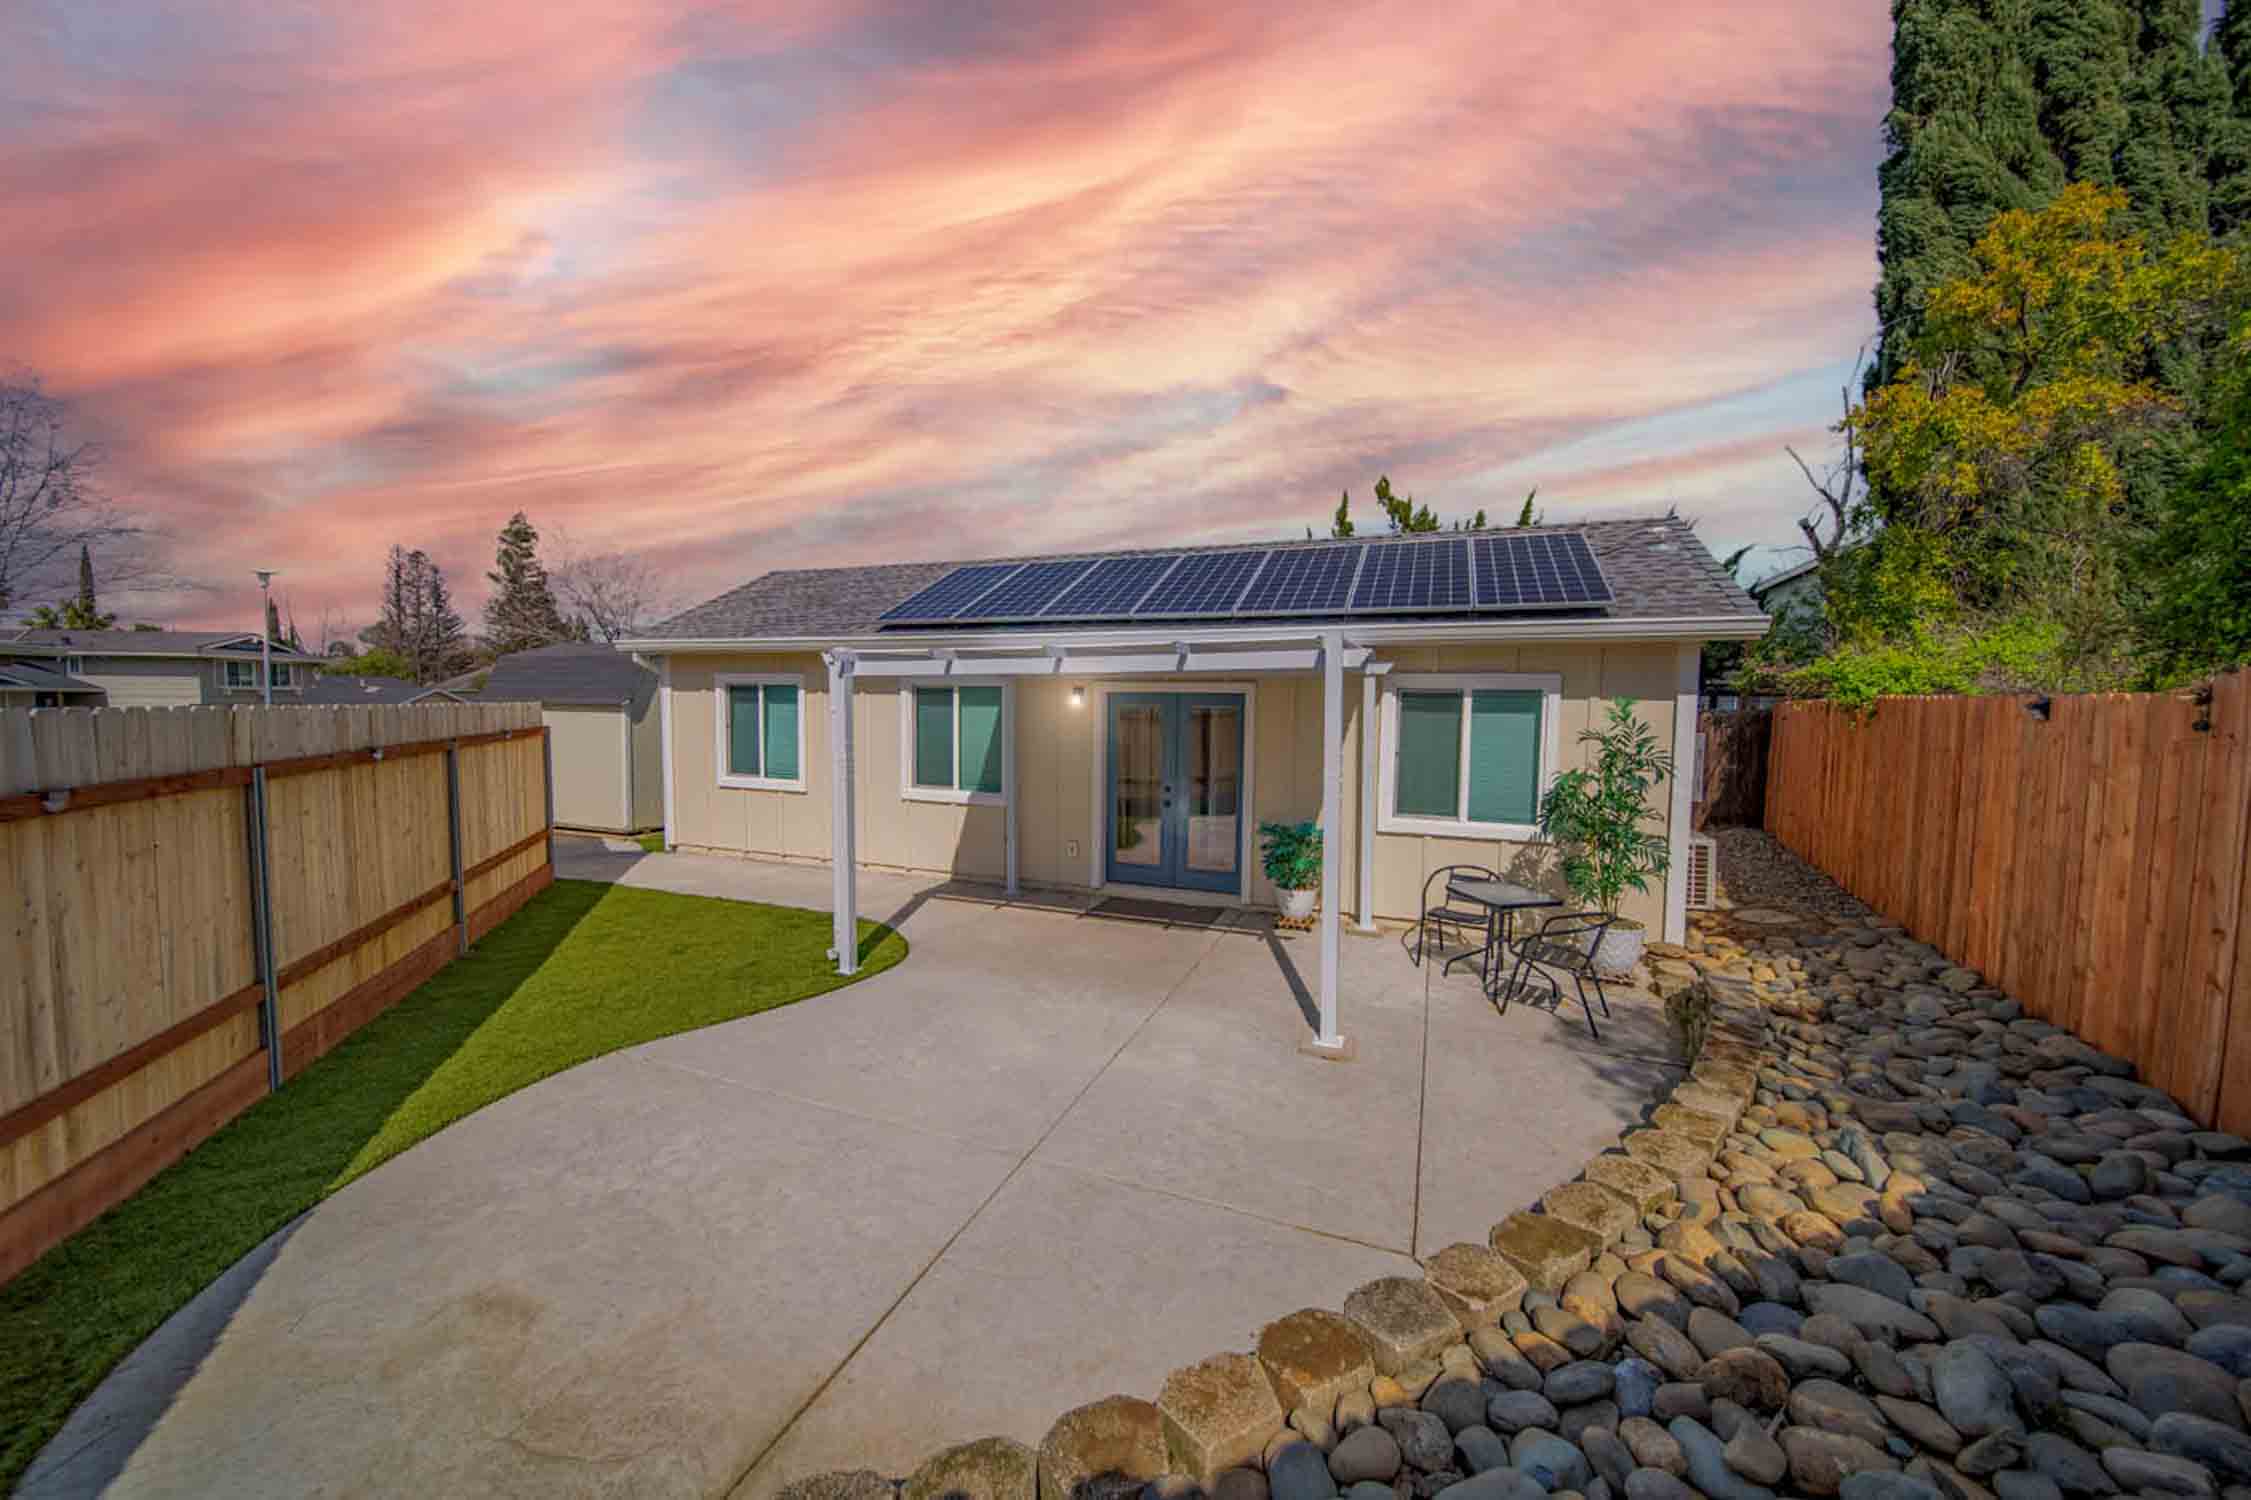 An ADU home with solar panels on the roof provided by top our top ADU builder in Bend / Redmond.